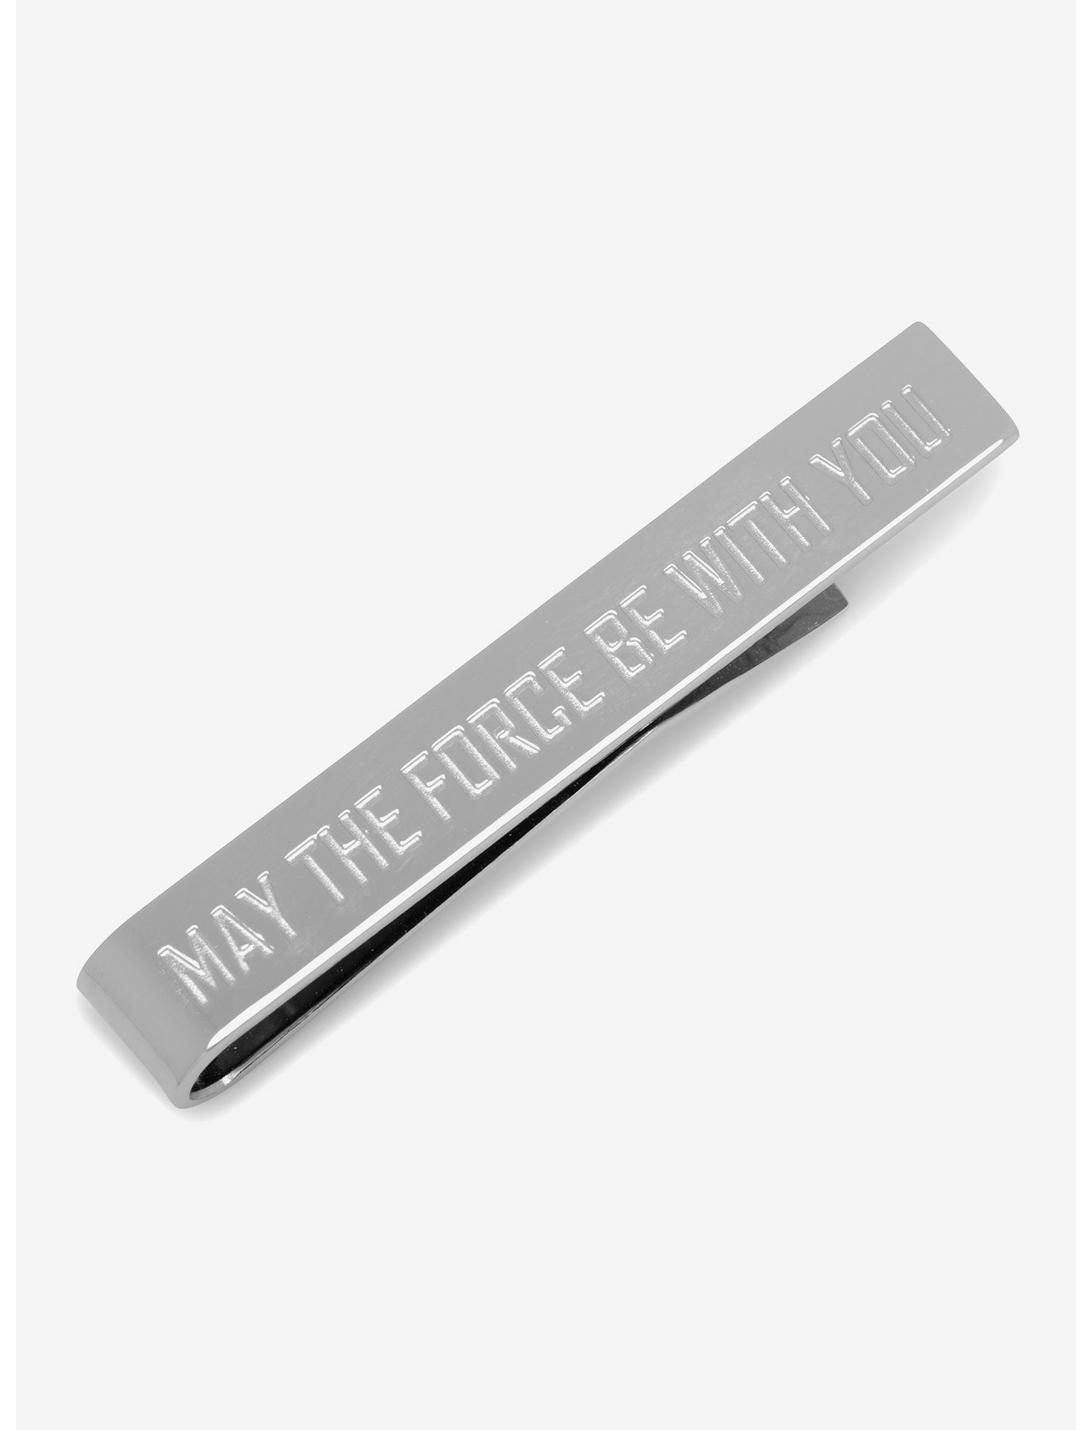 Star Wars May The Force Be With You Jedi Message Tie Bar, , hi-res